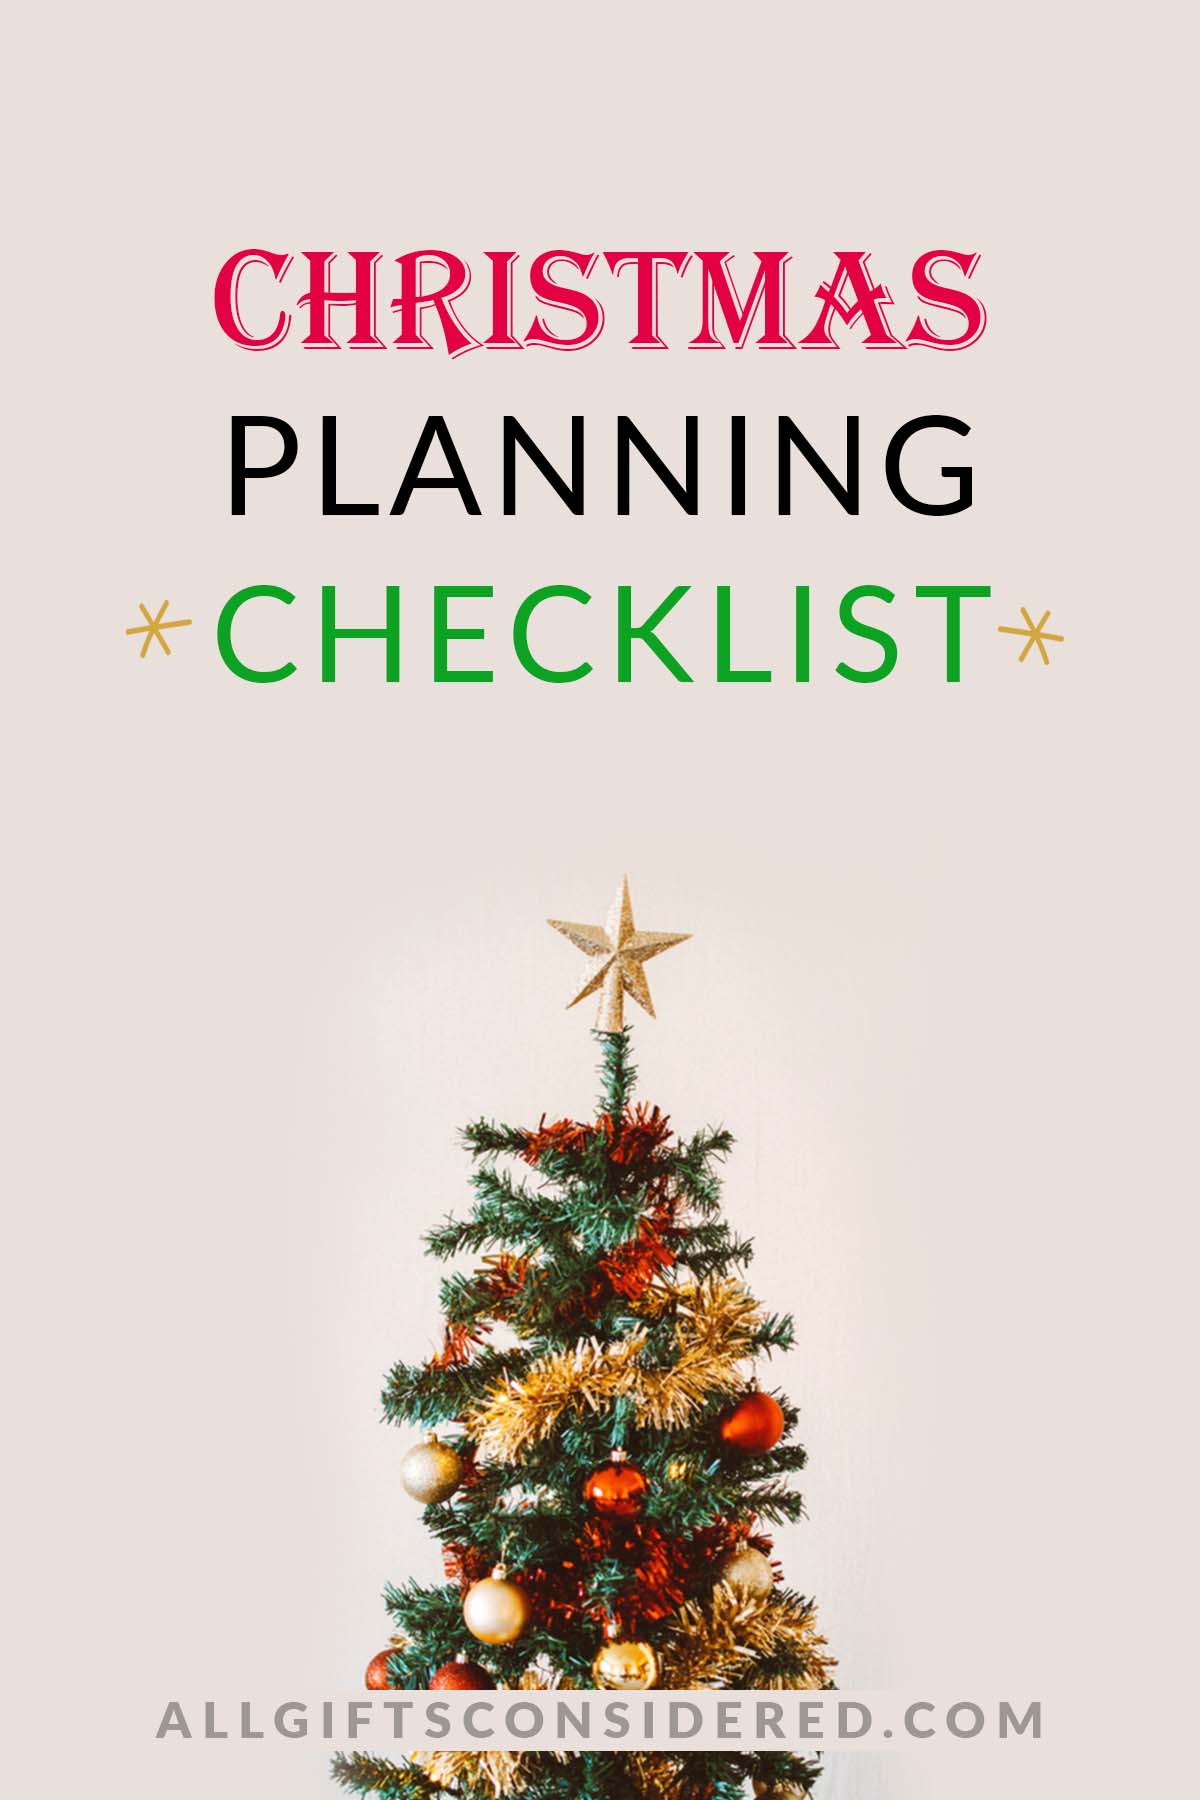 Christmas planning checklist - feature image